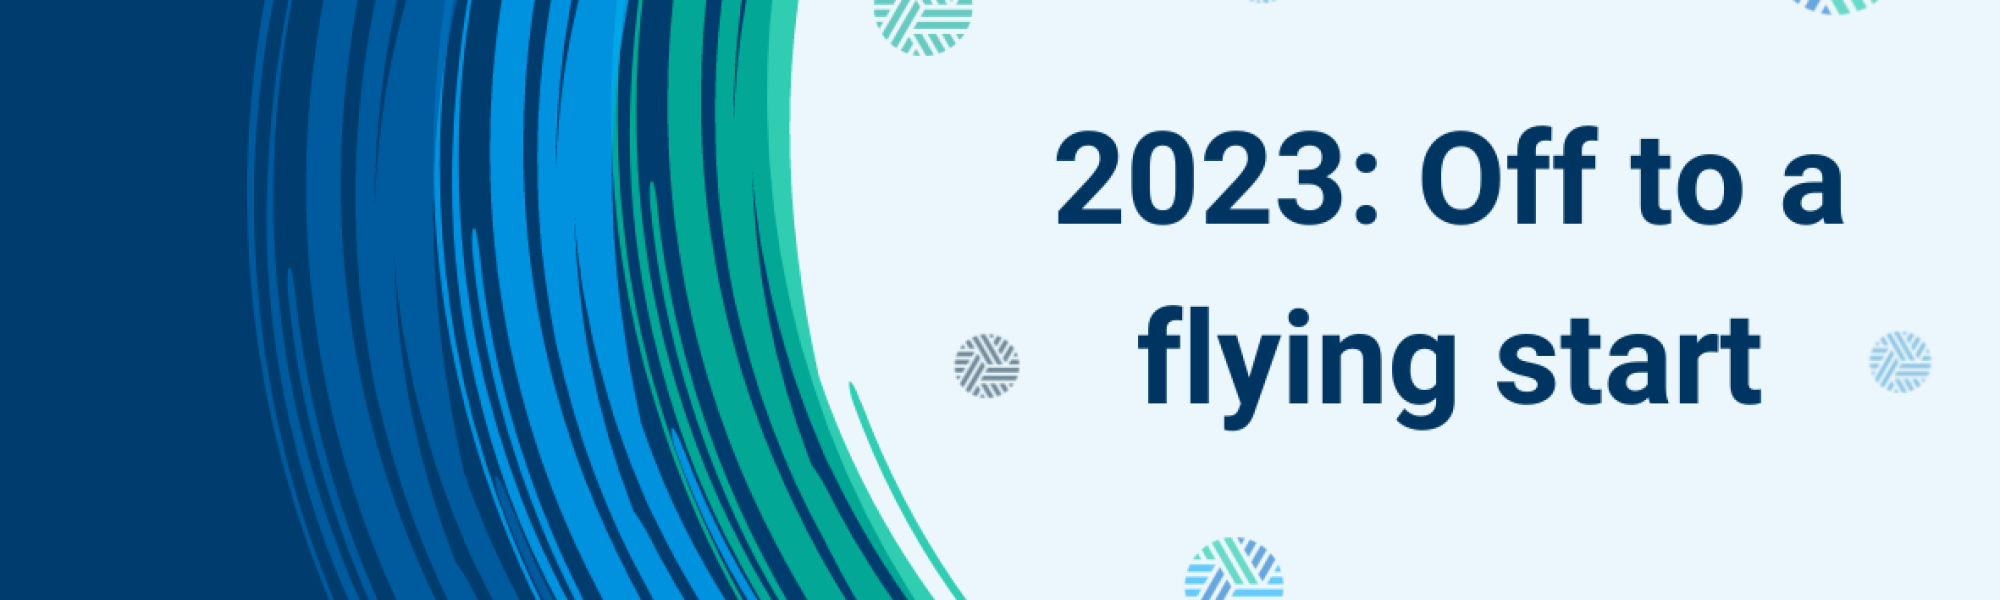 ASTP - 2023: Off to a flying start